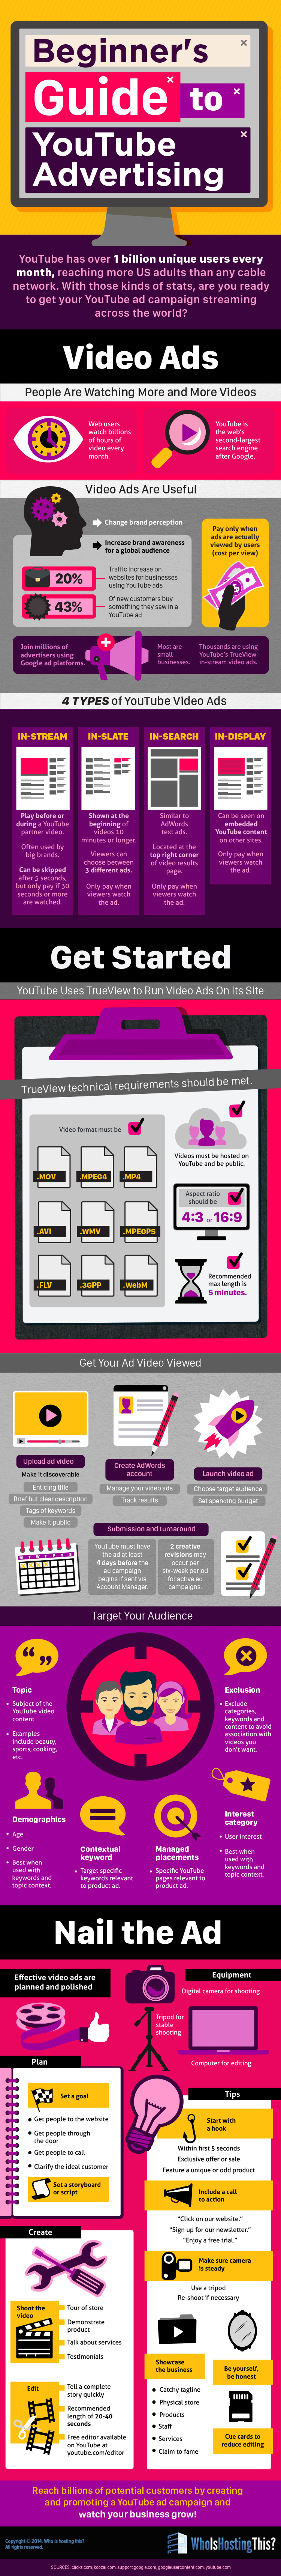 Beginner's Guide to YouTube Advertising - Infographic by WhoIsHostingThis_com